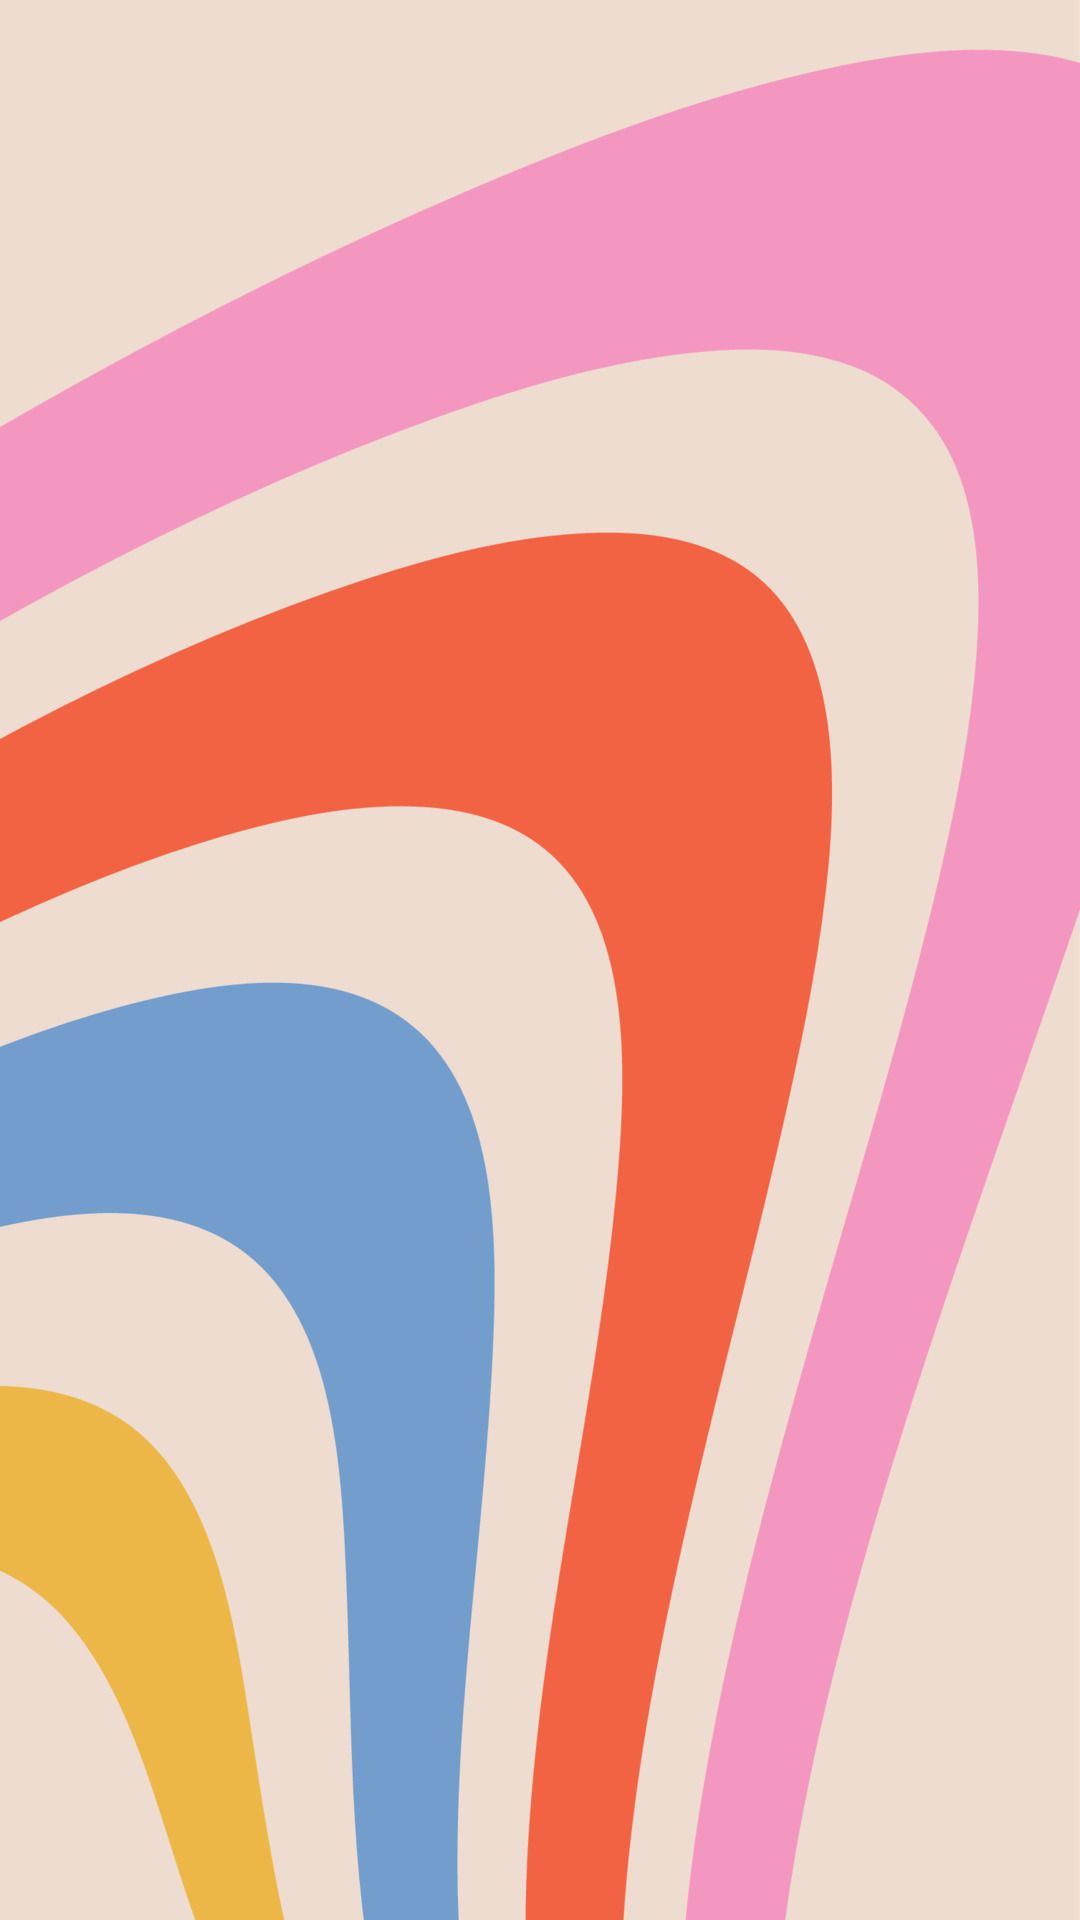 A colorful abstract design with curved lines - Abstract